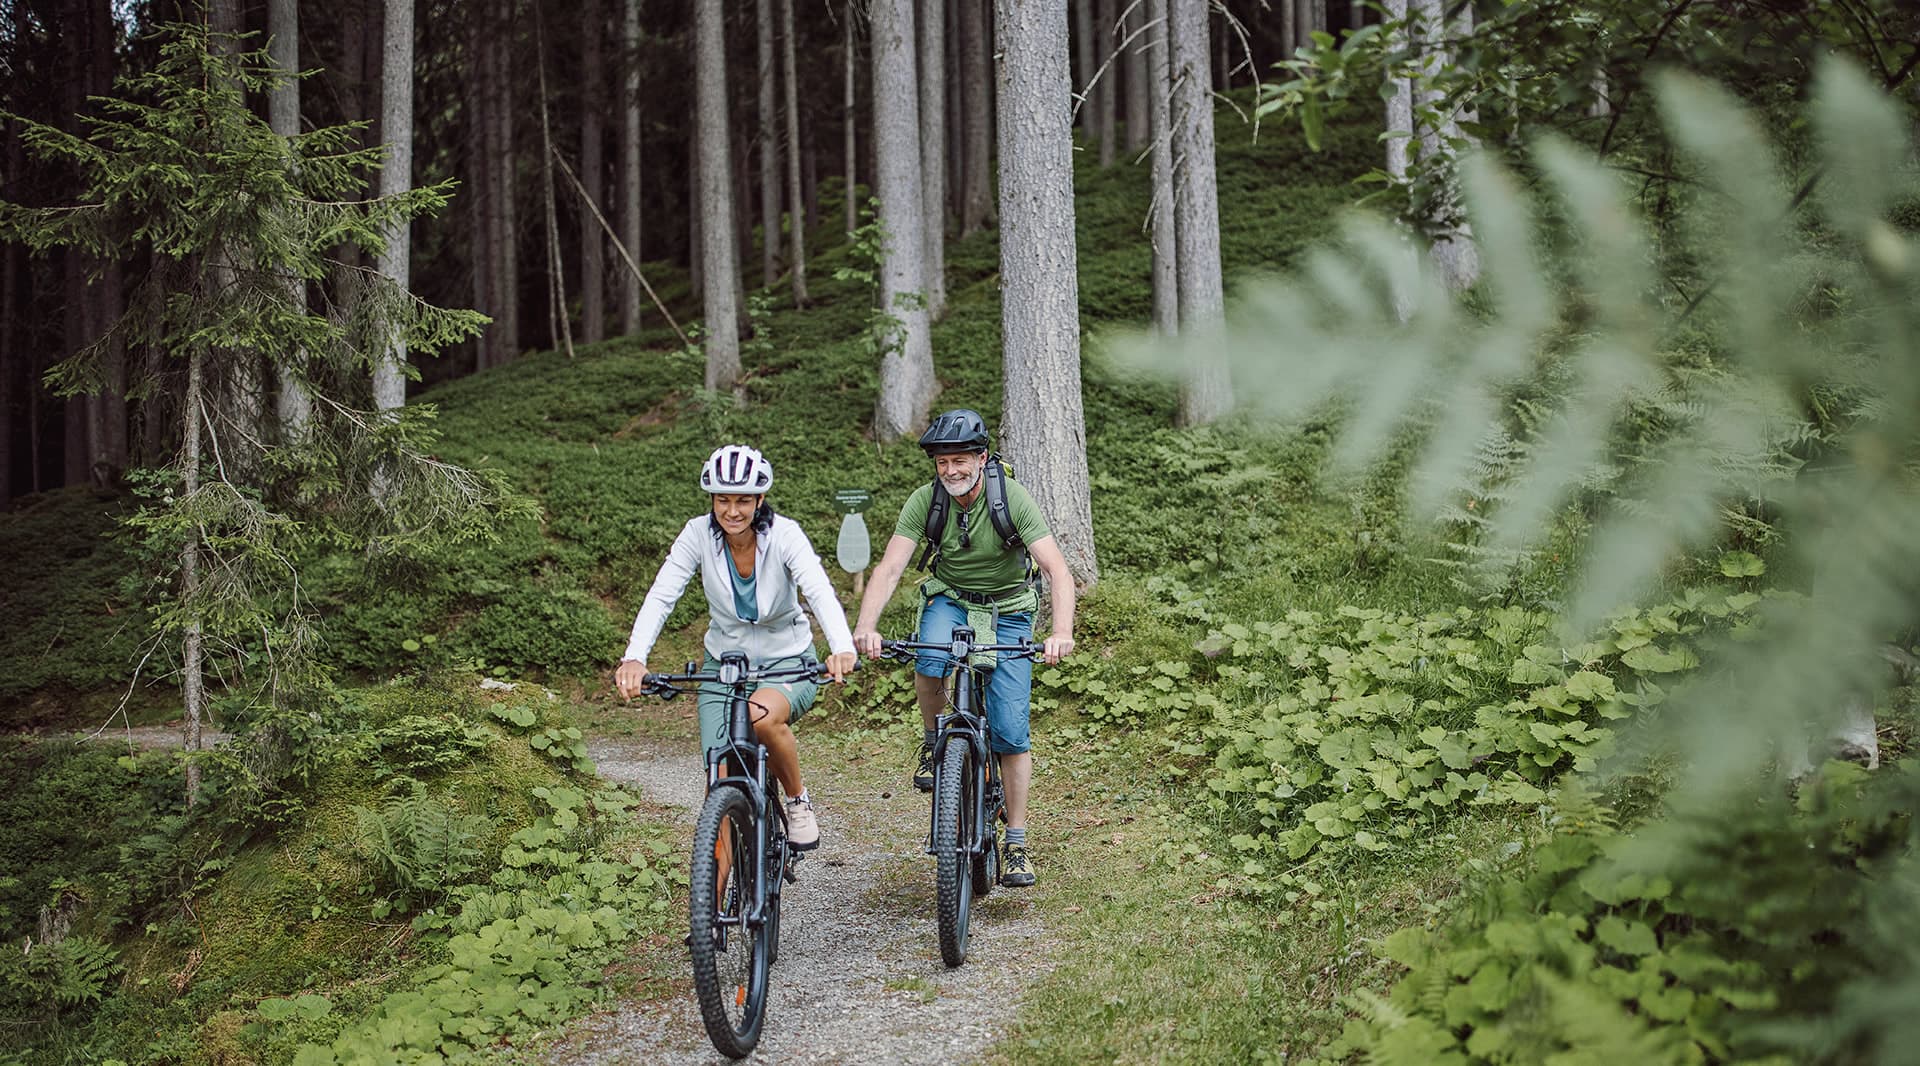 Mountainbike tour with rented bikes from the bike hotel Waldfrieden in Schladming